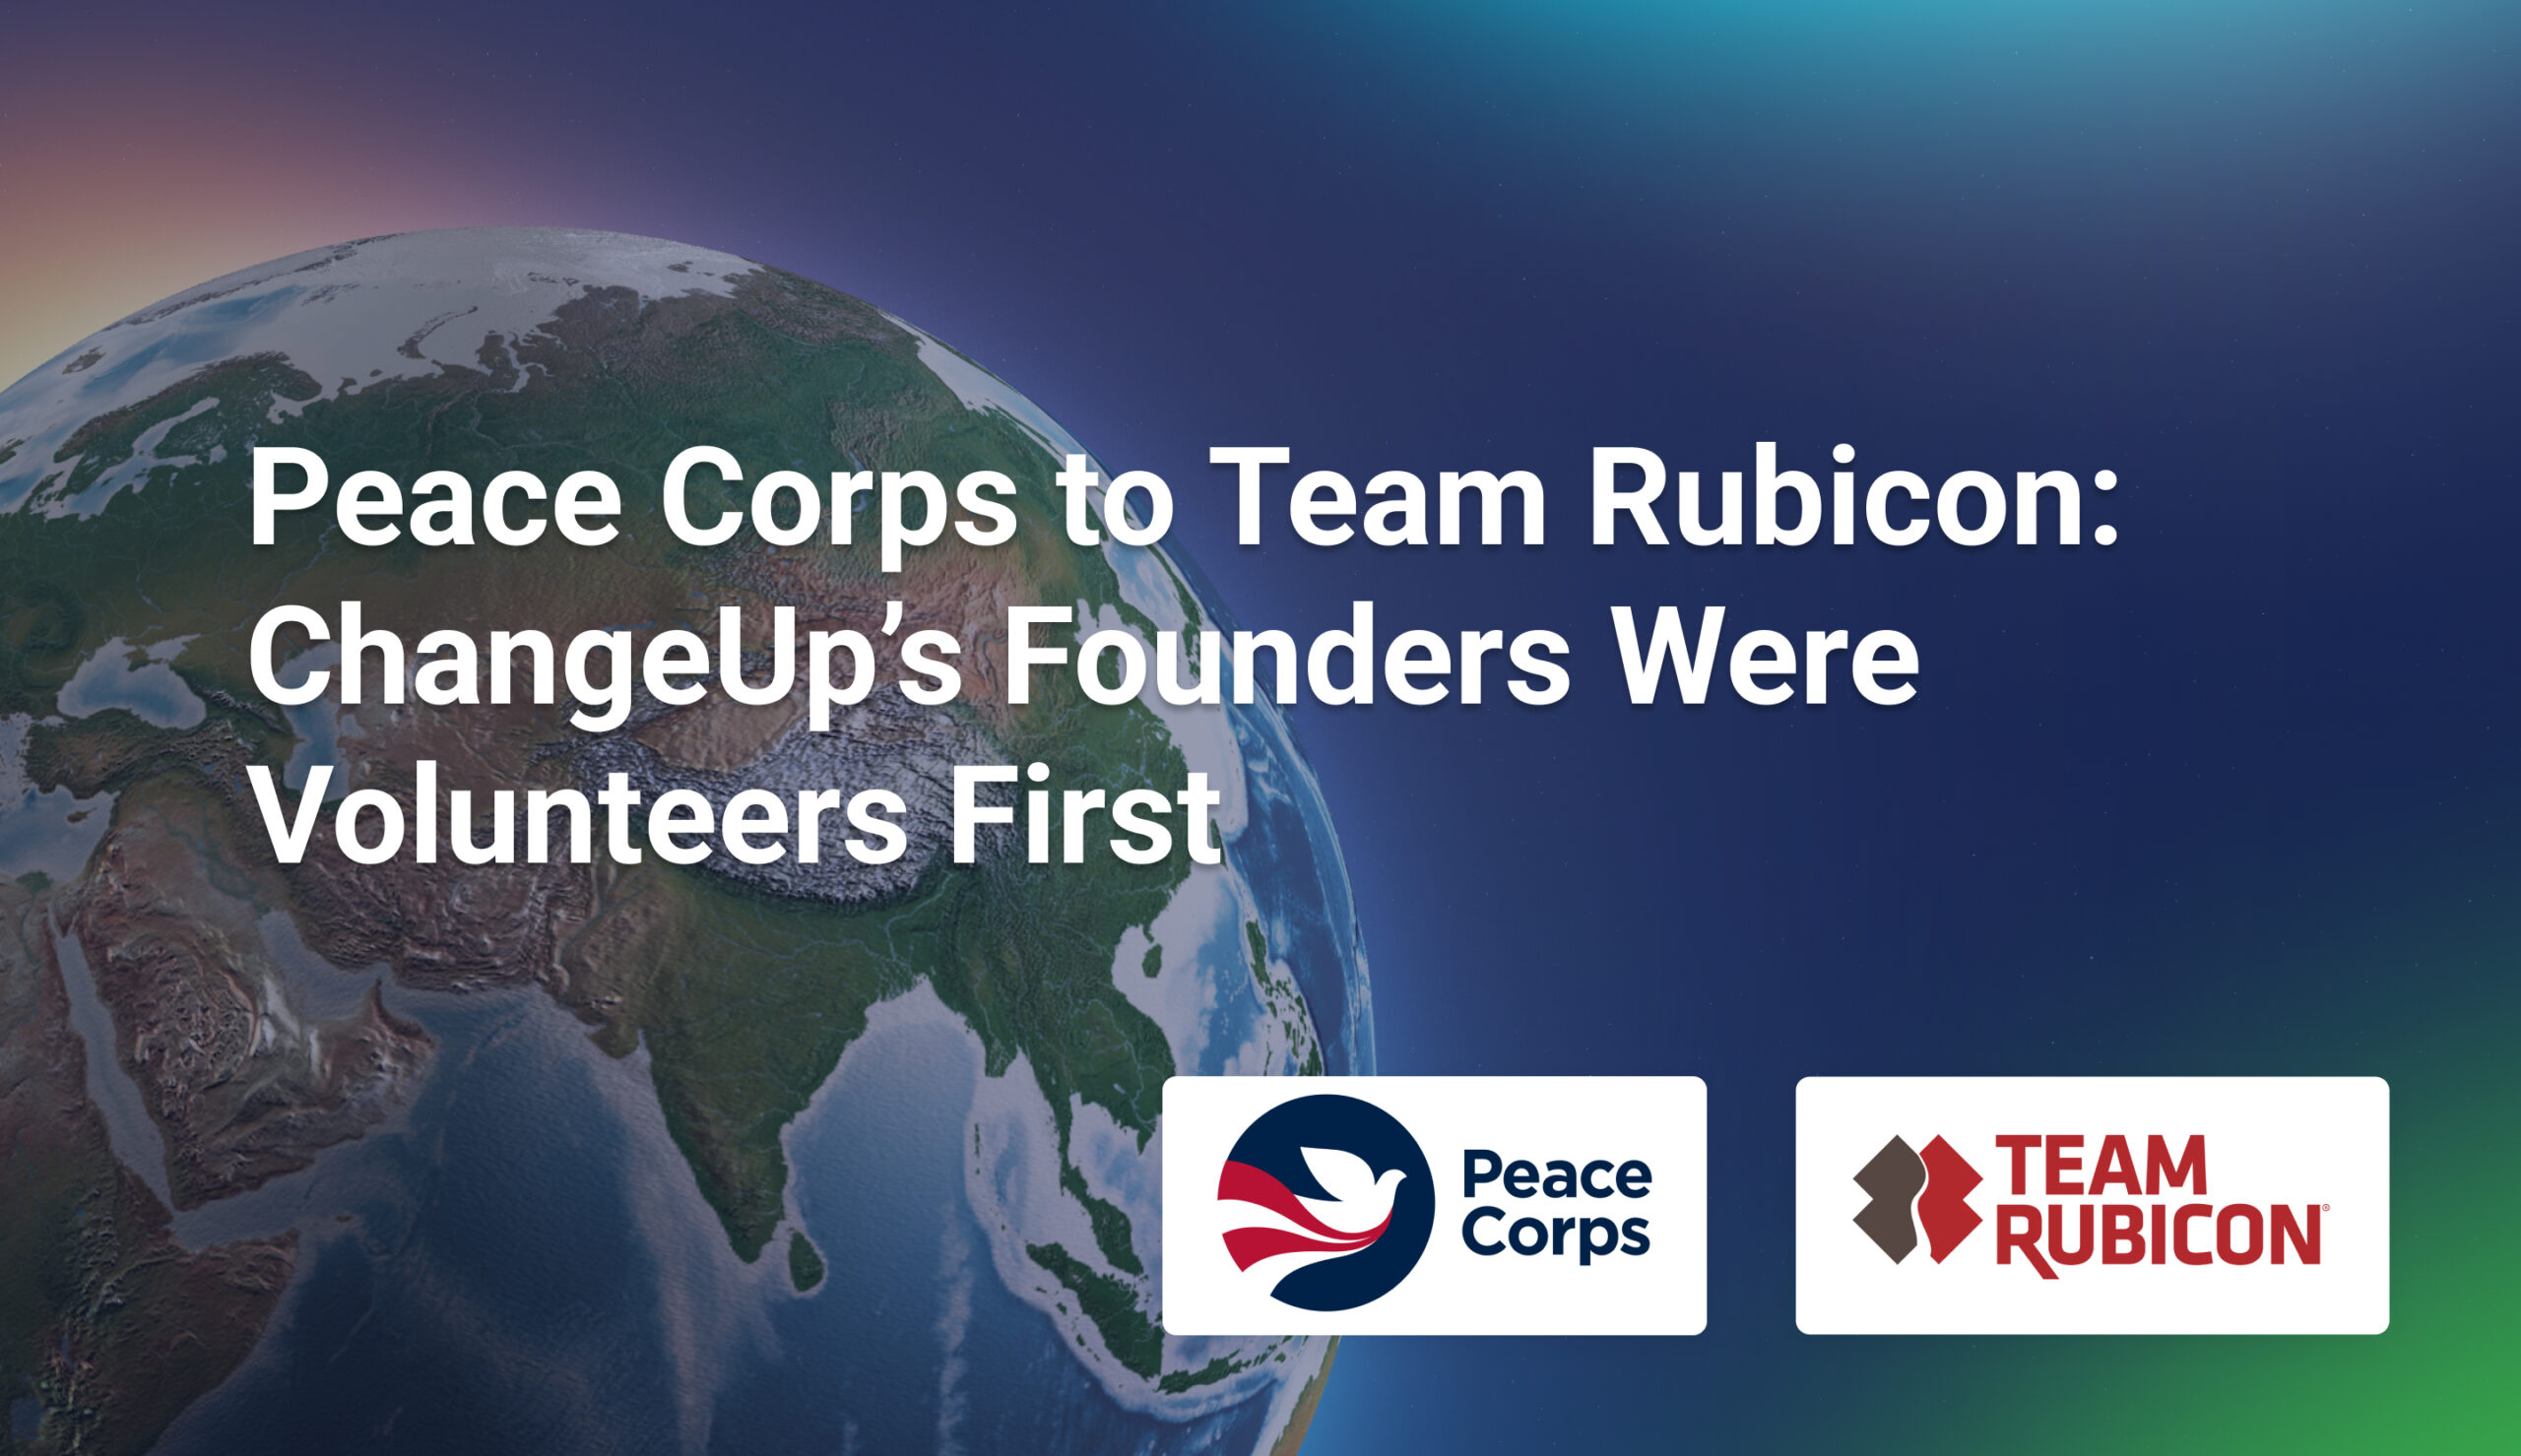 Image of the earth with Peace Corps and Team Rubicon logos